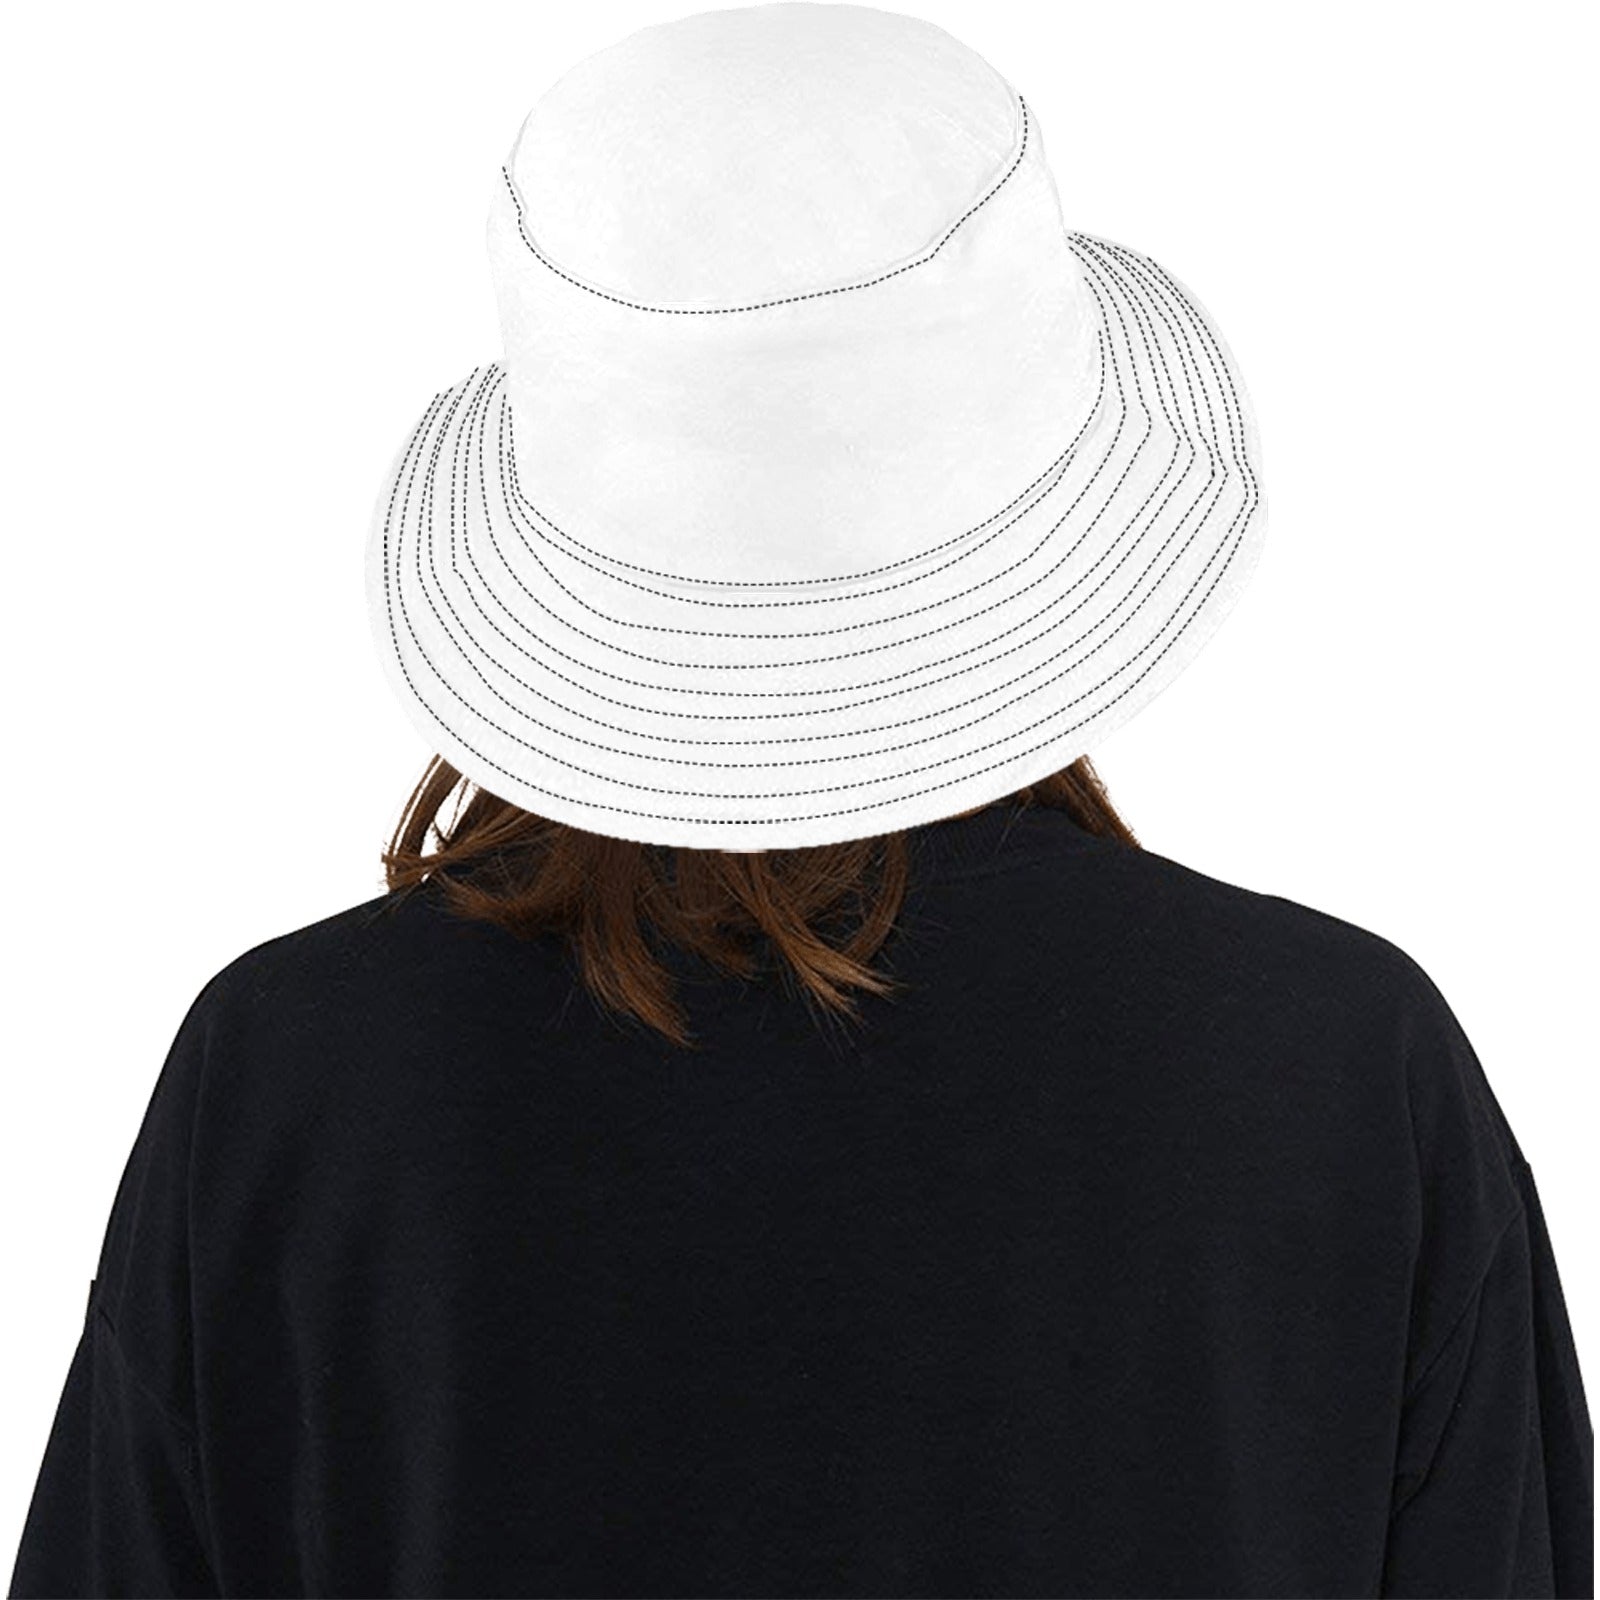 God Over Everything Colorblock Bucket Hat